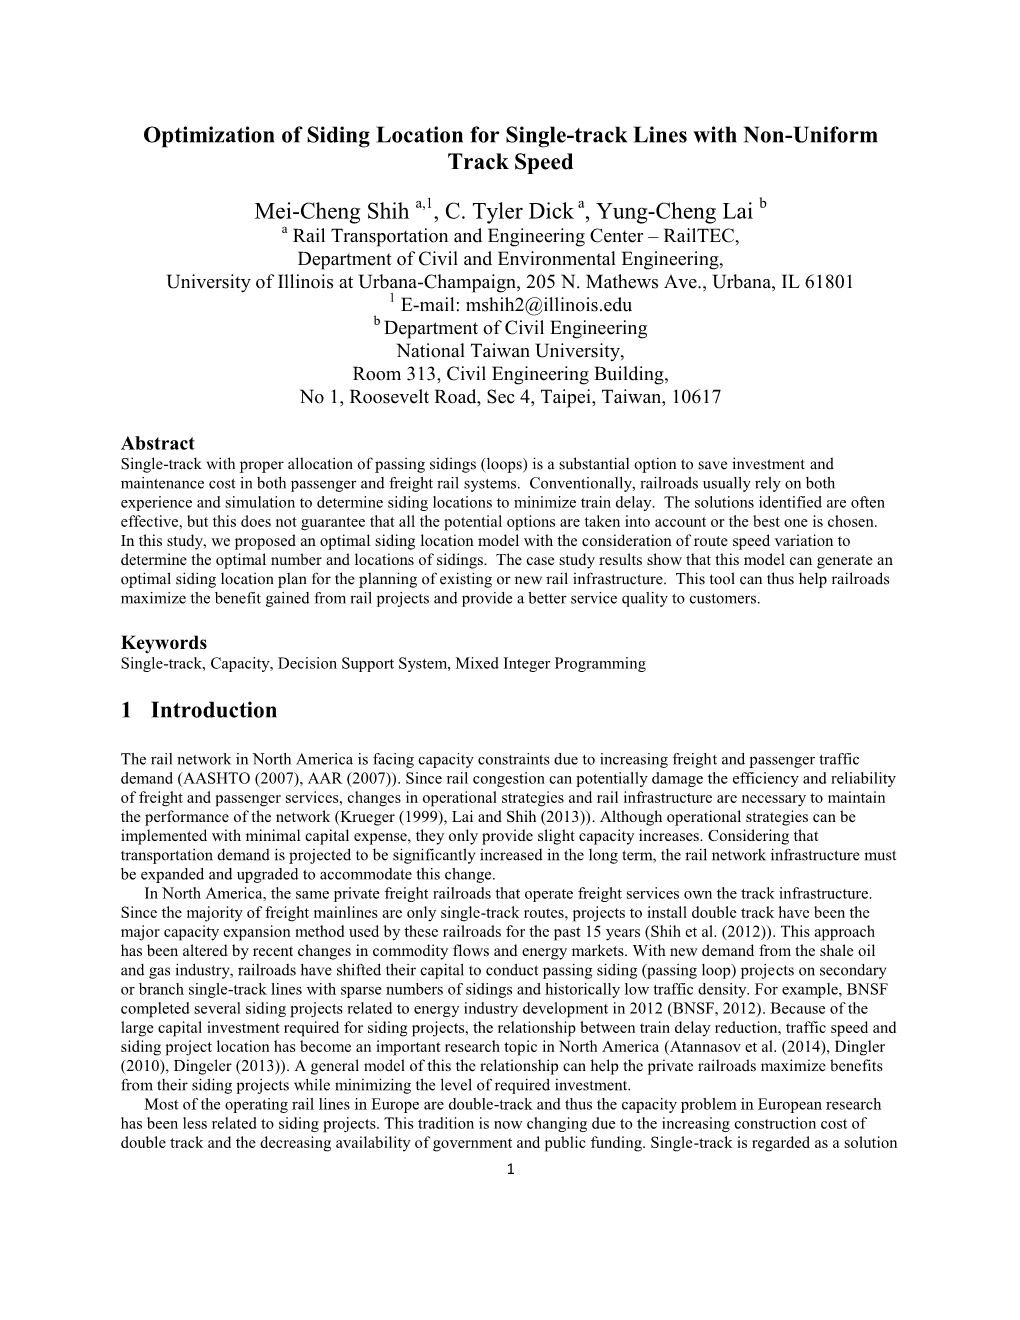 Optimization of Siding Location for Single-Track Lines with Non-Uniform Track Speed